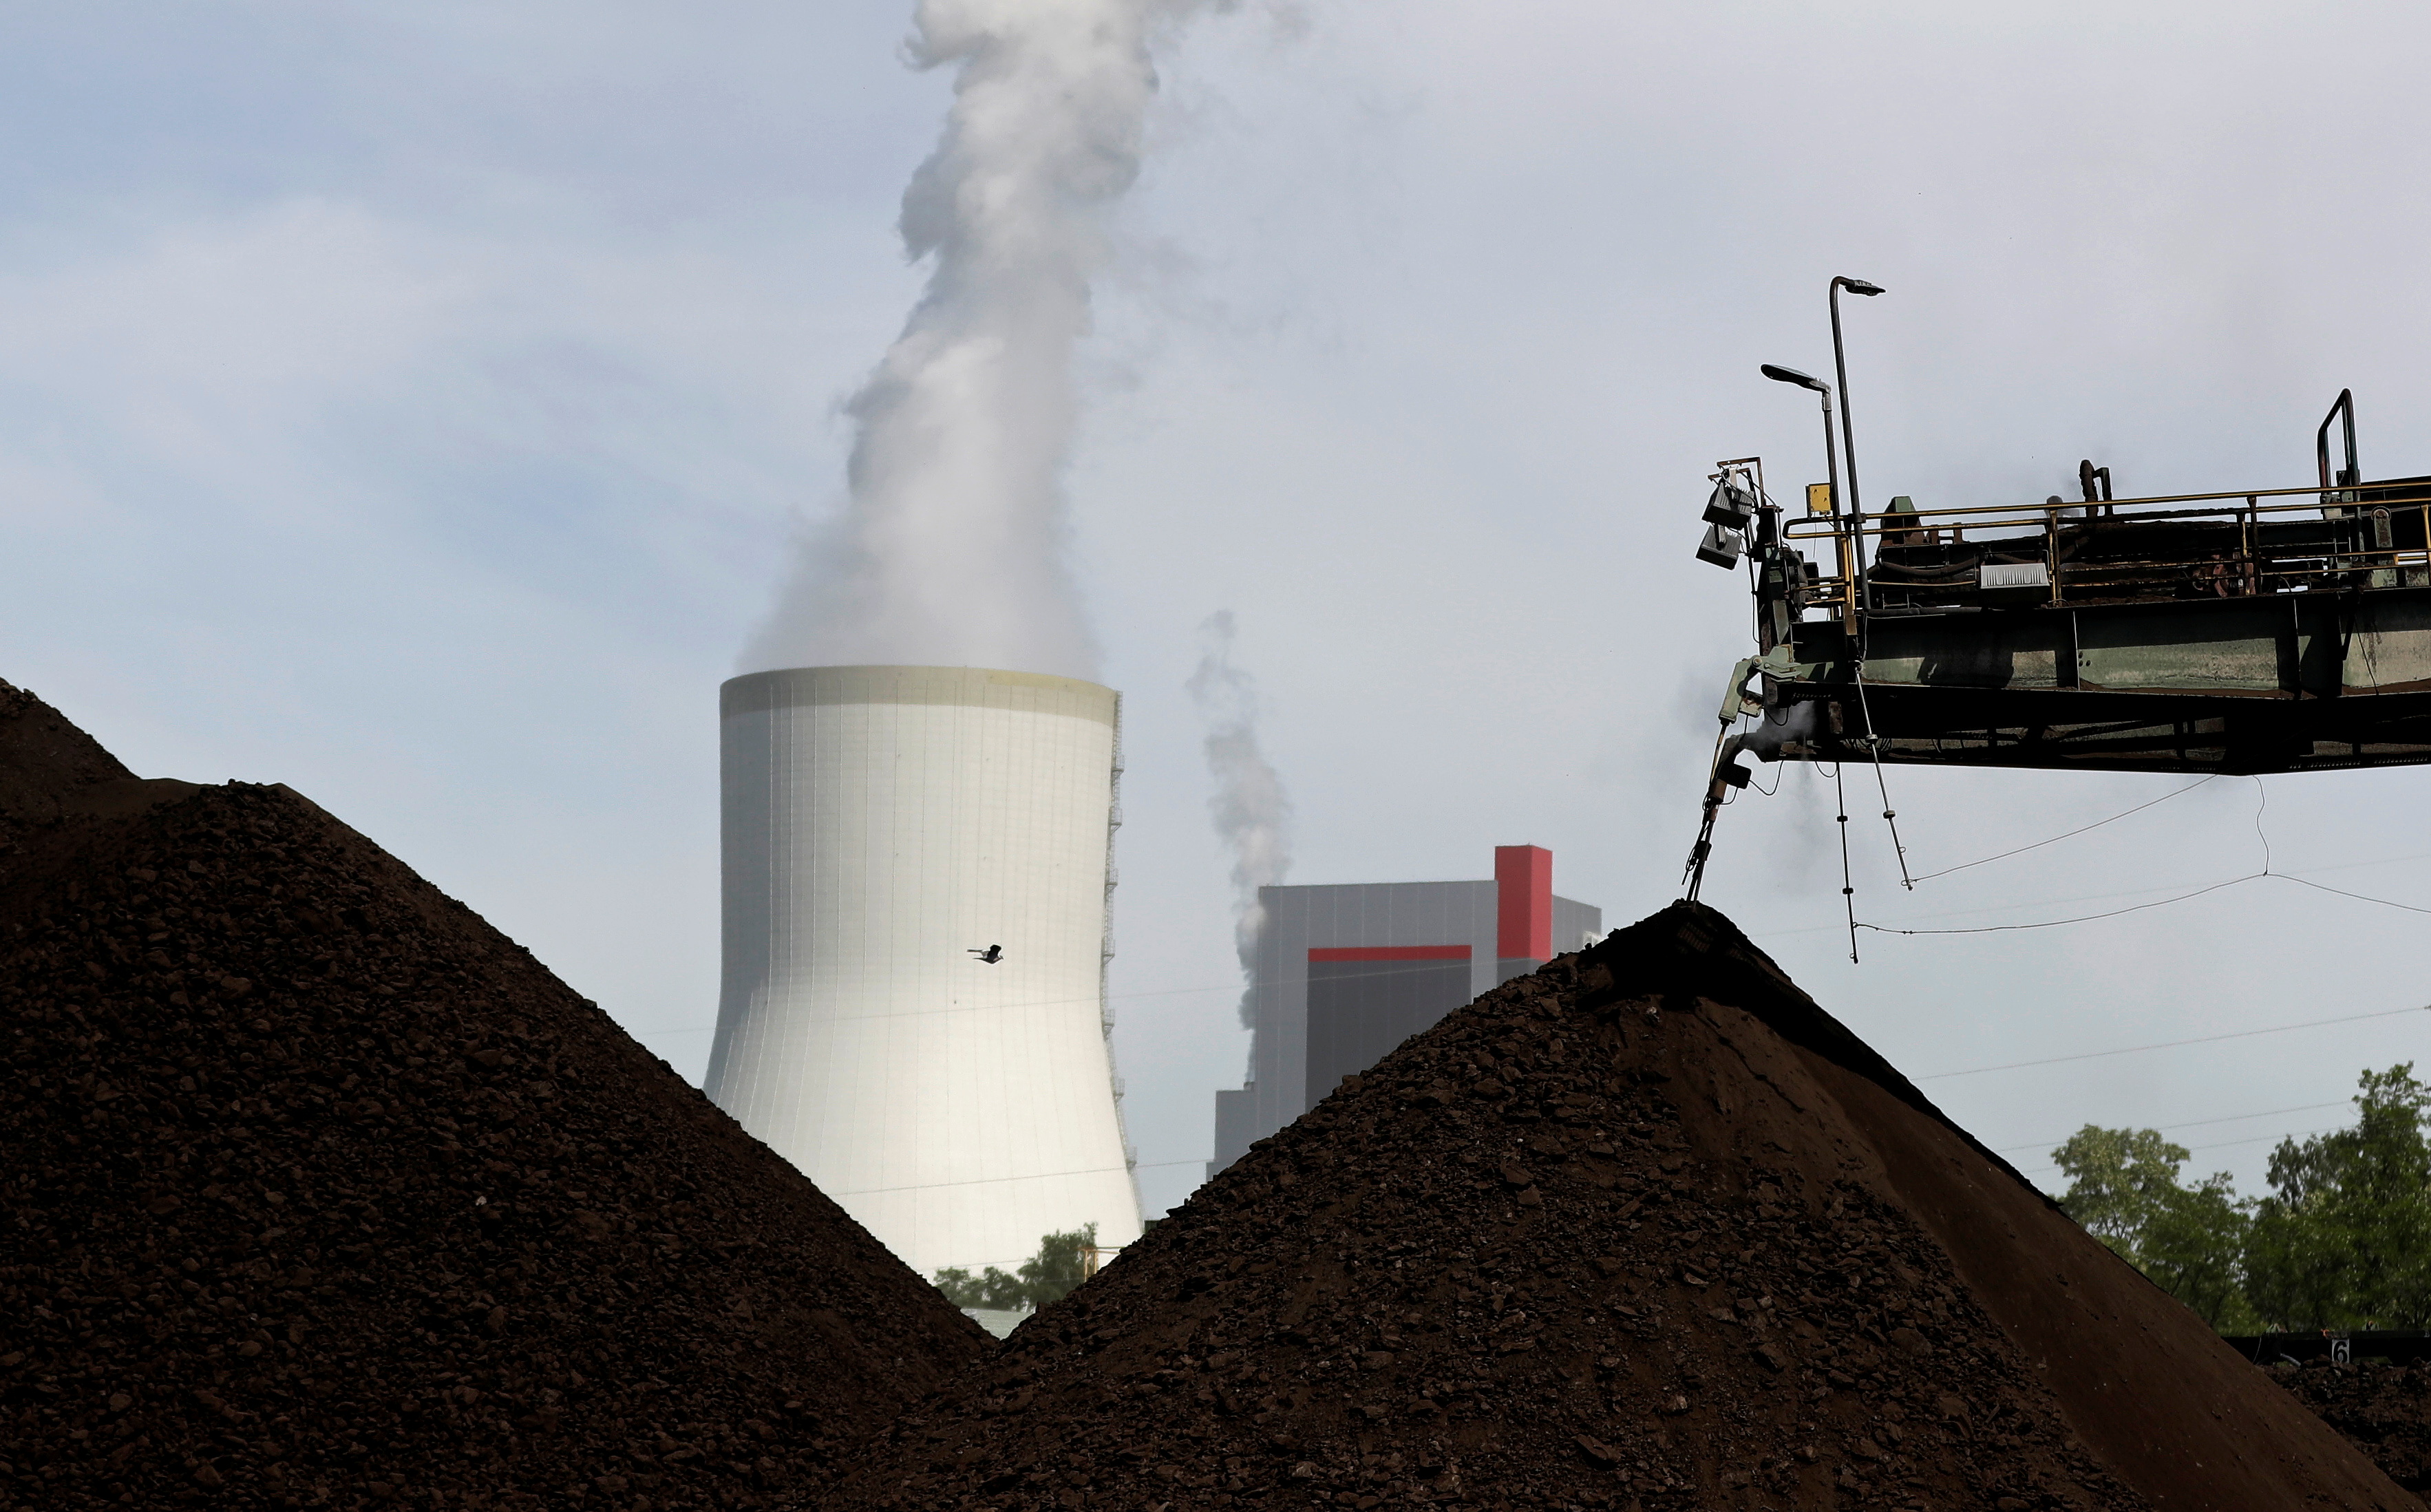 A cooling tower from the Turow coal-fired power plant is seen near the Turow open-pit coal mine operated by the company PGE in Bogatynia